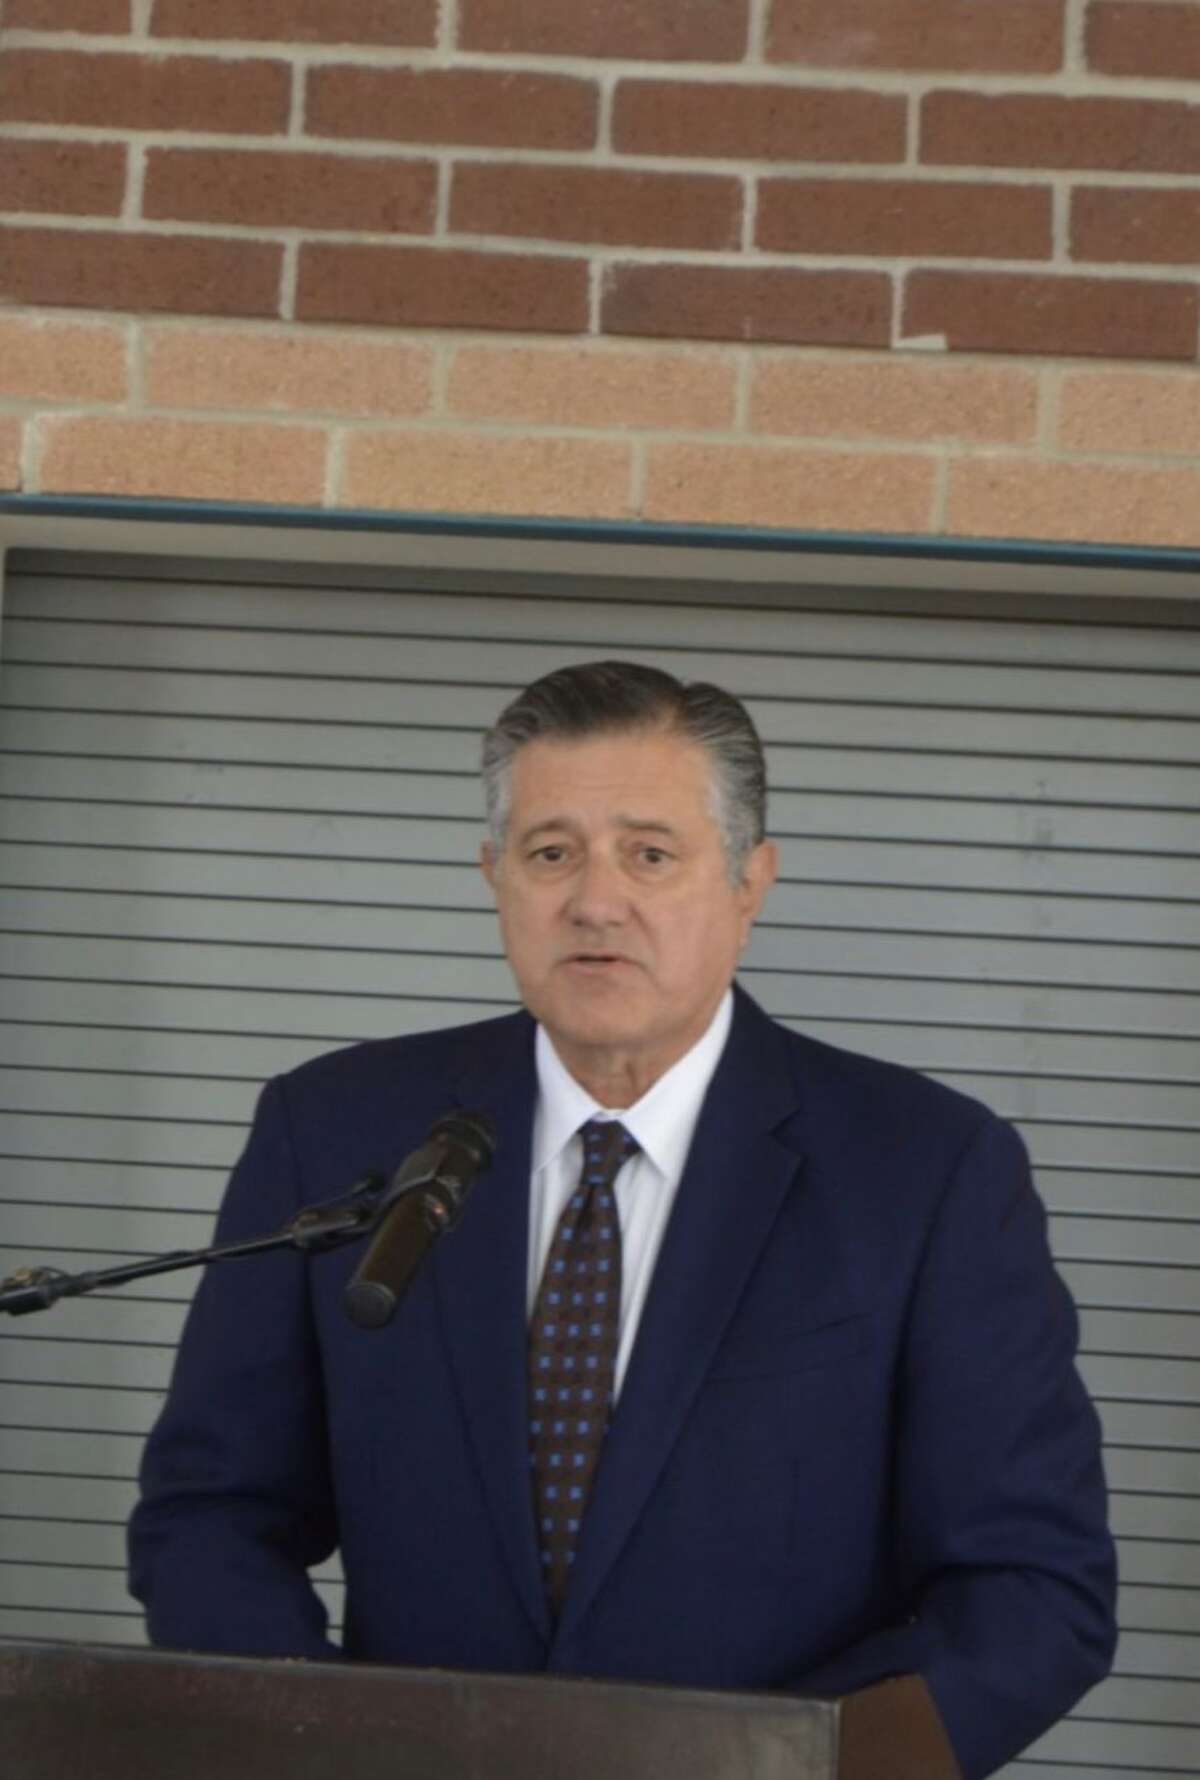 Texas State Rep. Richard Pena Raymond called on the Texas Legislature to dedicate $20 billion of the expected state surplus to property relief for homeowners on Tuesday, Nov. 15, 2022 at the Student Activity Complex in Laredo.